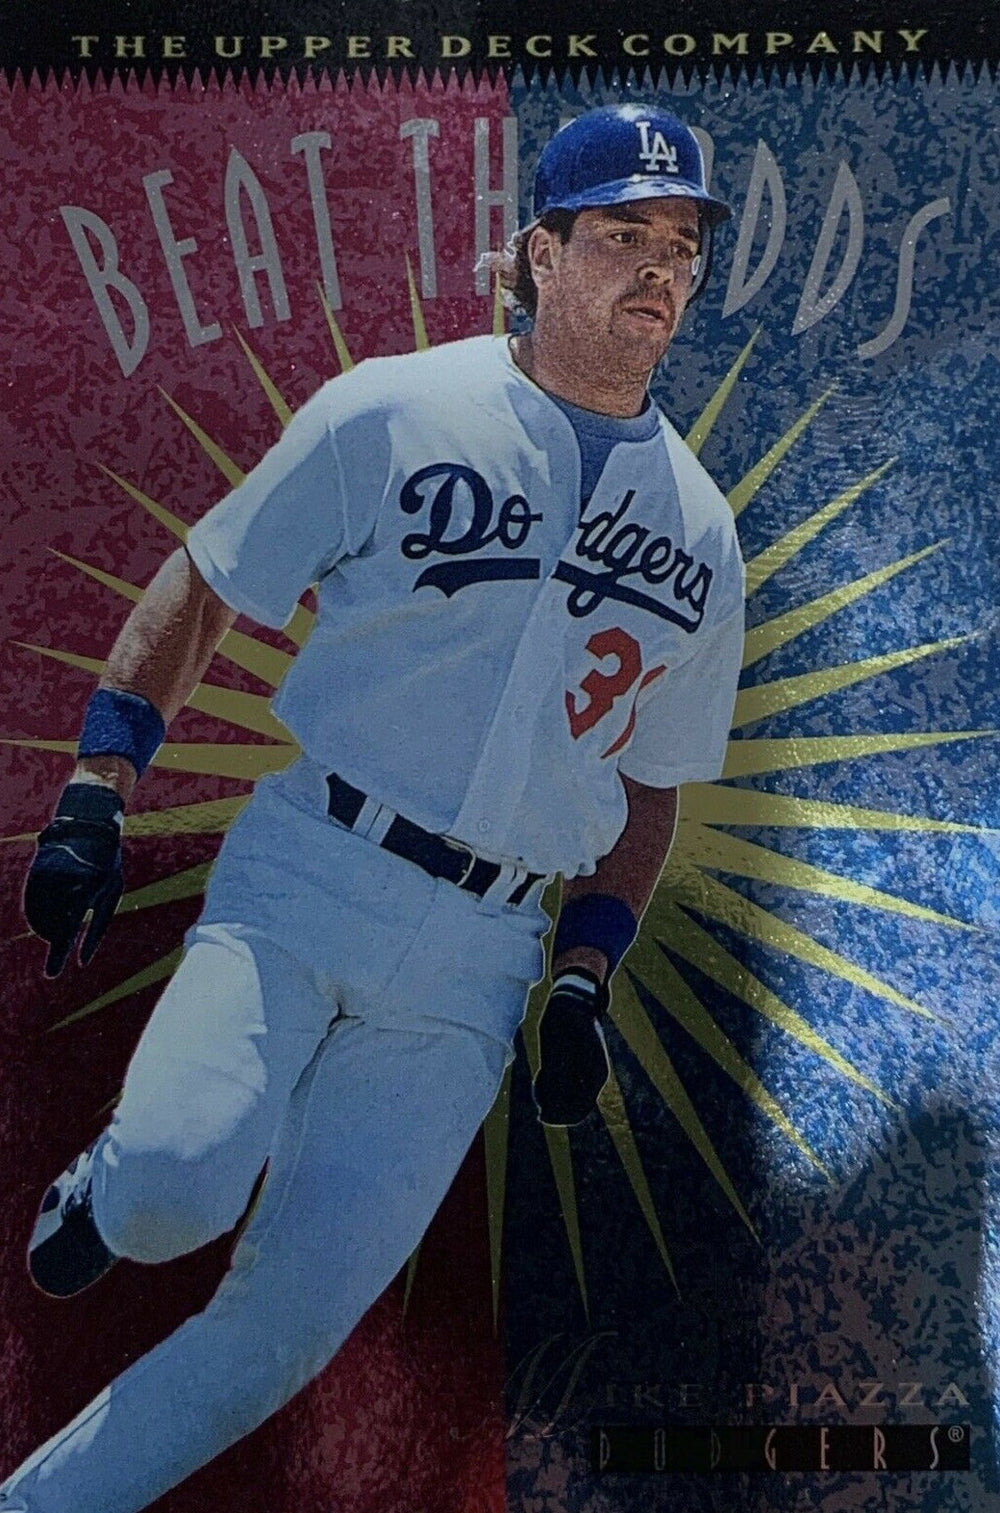 Mike Piazza 1996 Upper Deck Beat the Odds Series Mint Card  #145